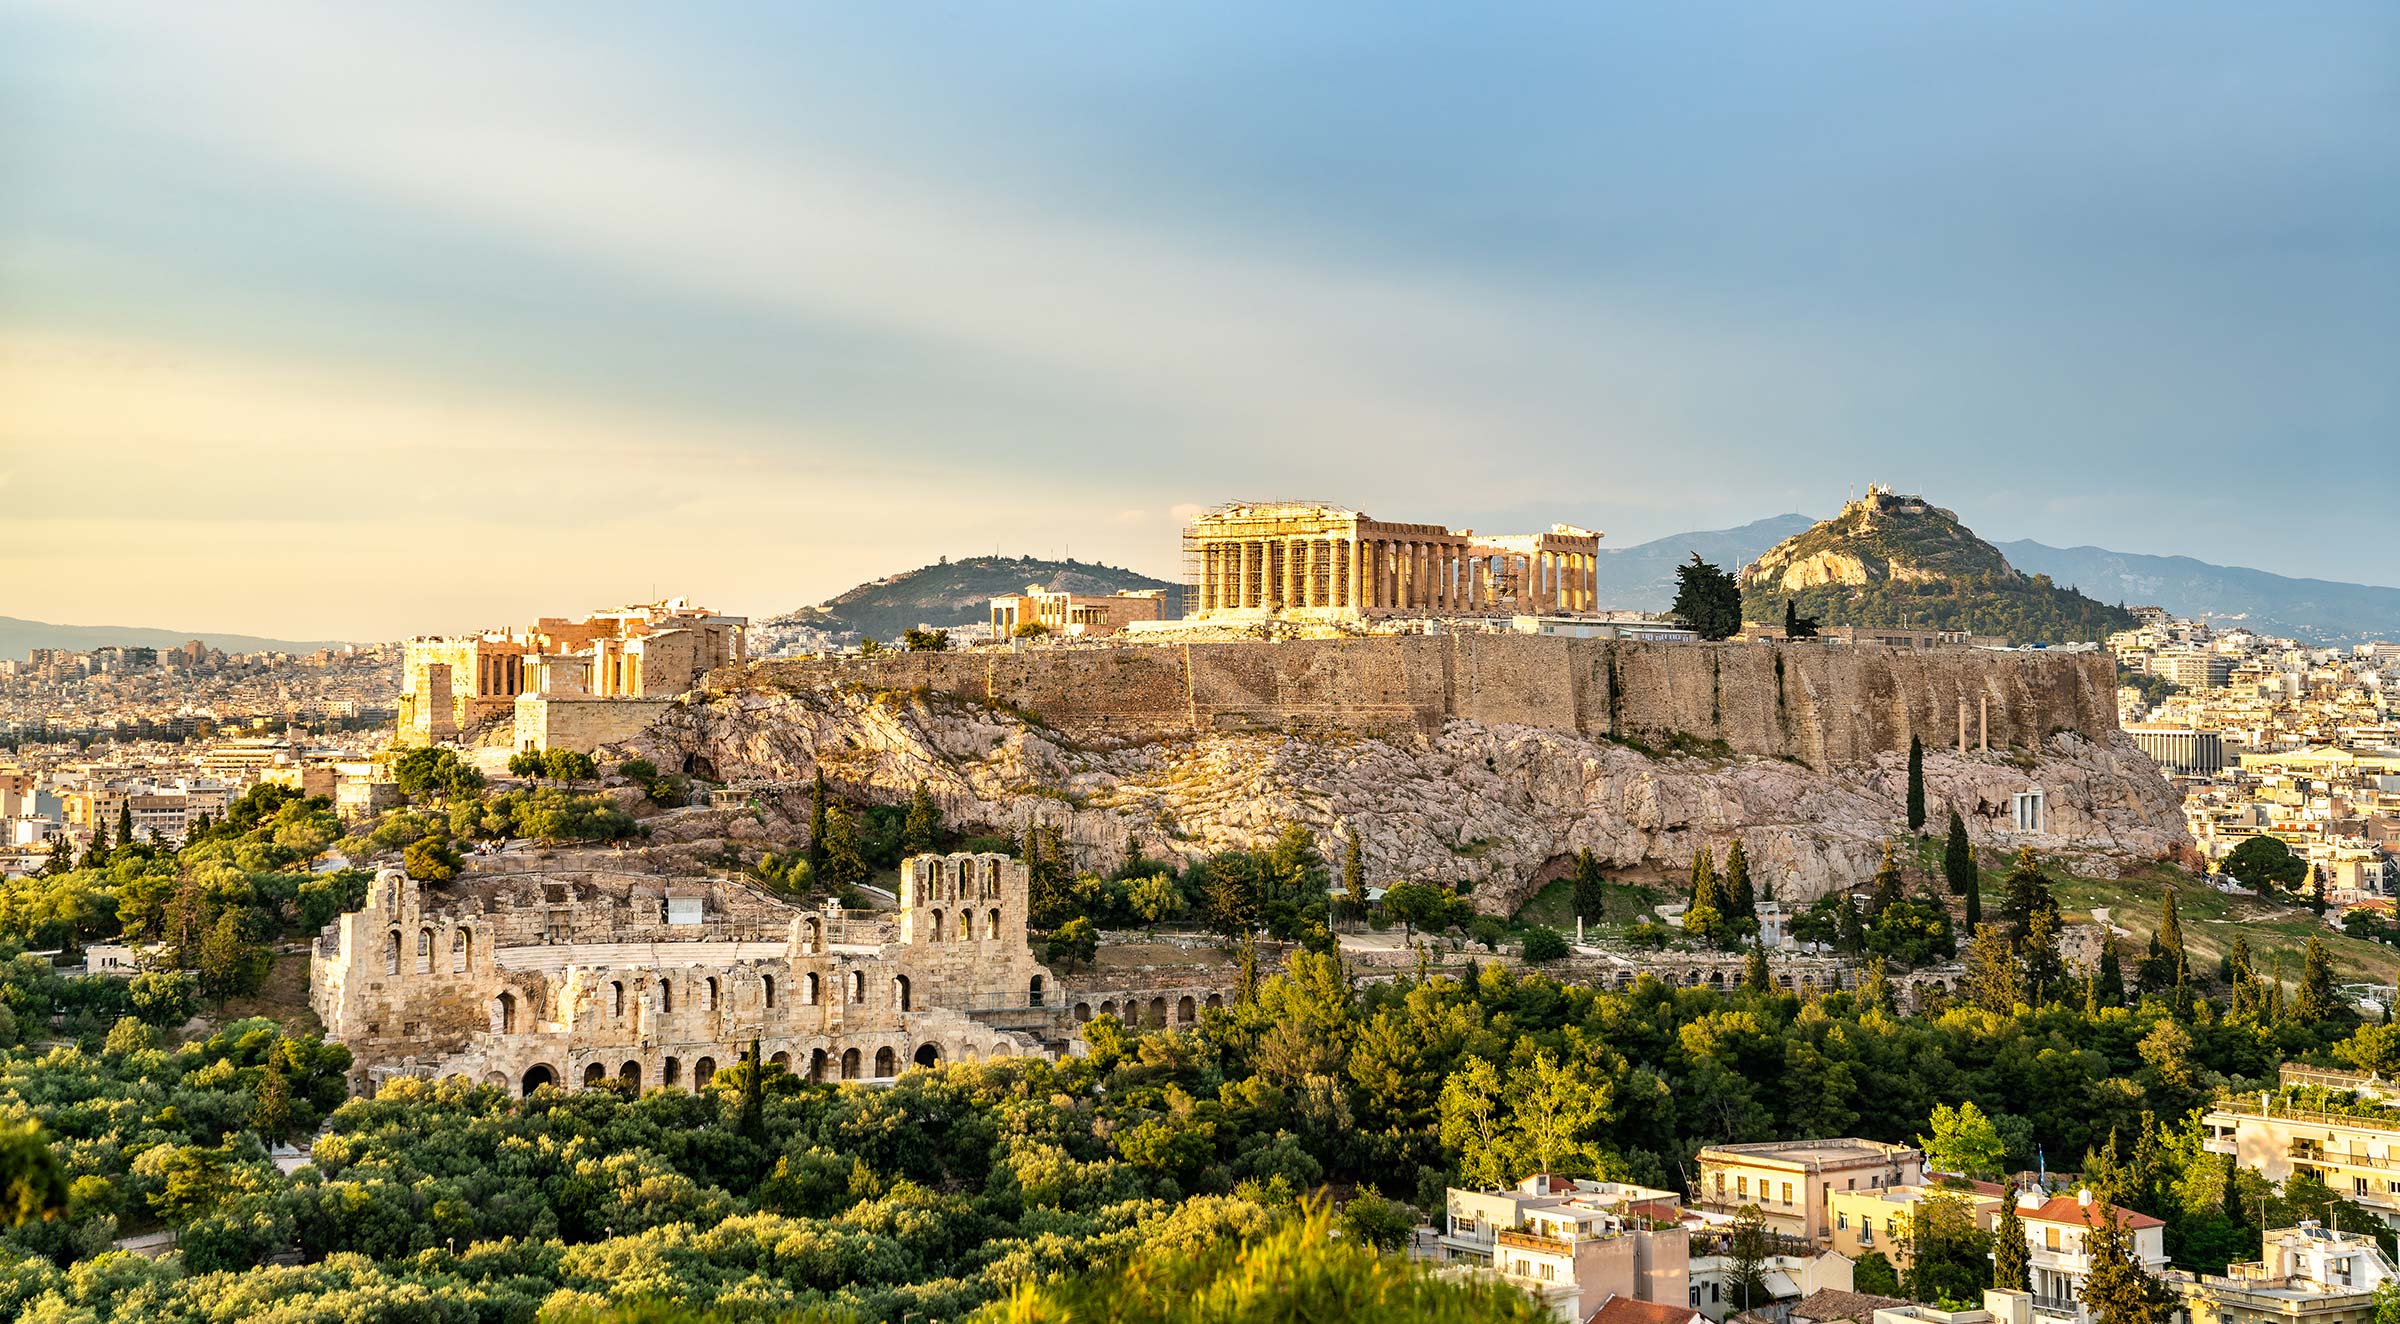 View of the Acropolis of Athens. Image licensed from iStockPhoto